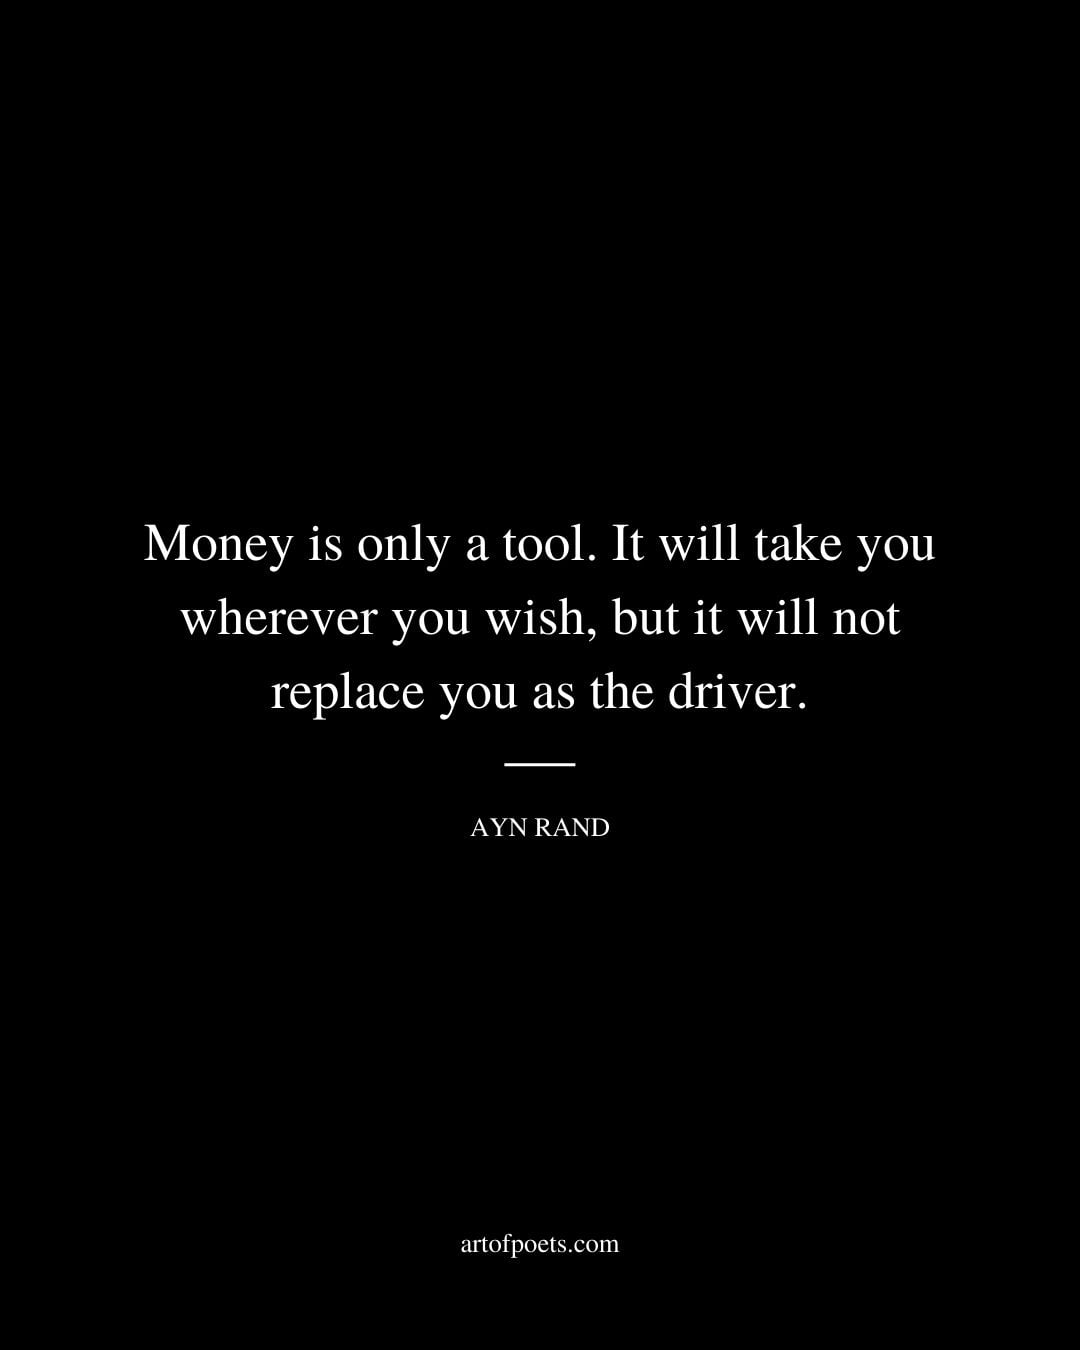 Money is only a tool. It will take you wherever you wish but it will not replace you as the driver